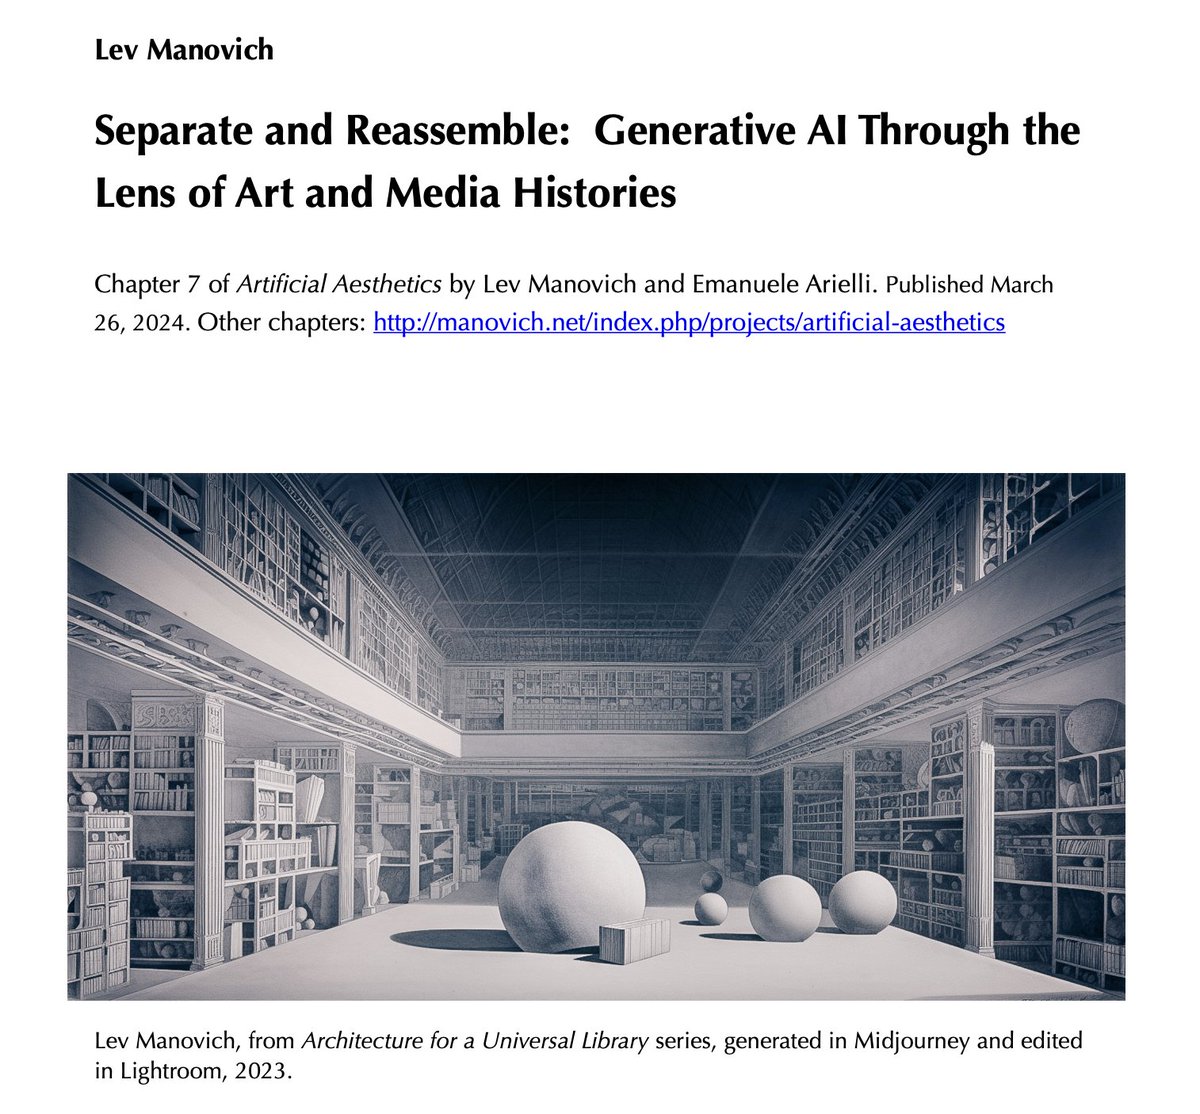 Chapter 7 of our book 'Artificial Aesthetics: Generative AI, Art and Visual Media' is now available. Lev Manovich. Separate and Reassemble: Generative AI Through the Lens of Art and Media Histories (free PDF): manovich.net/content/04-pro…